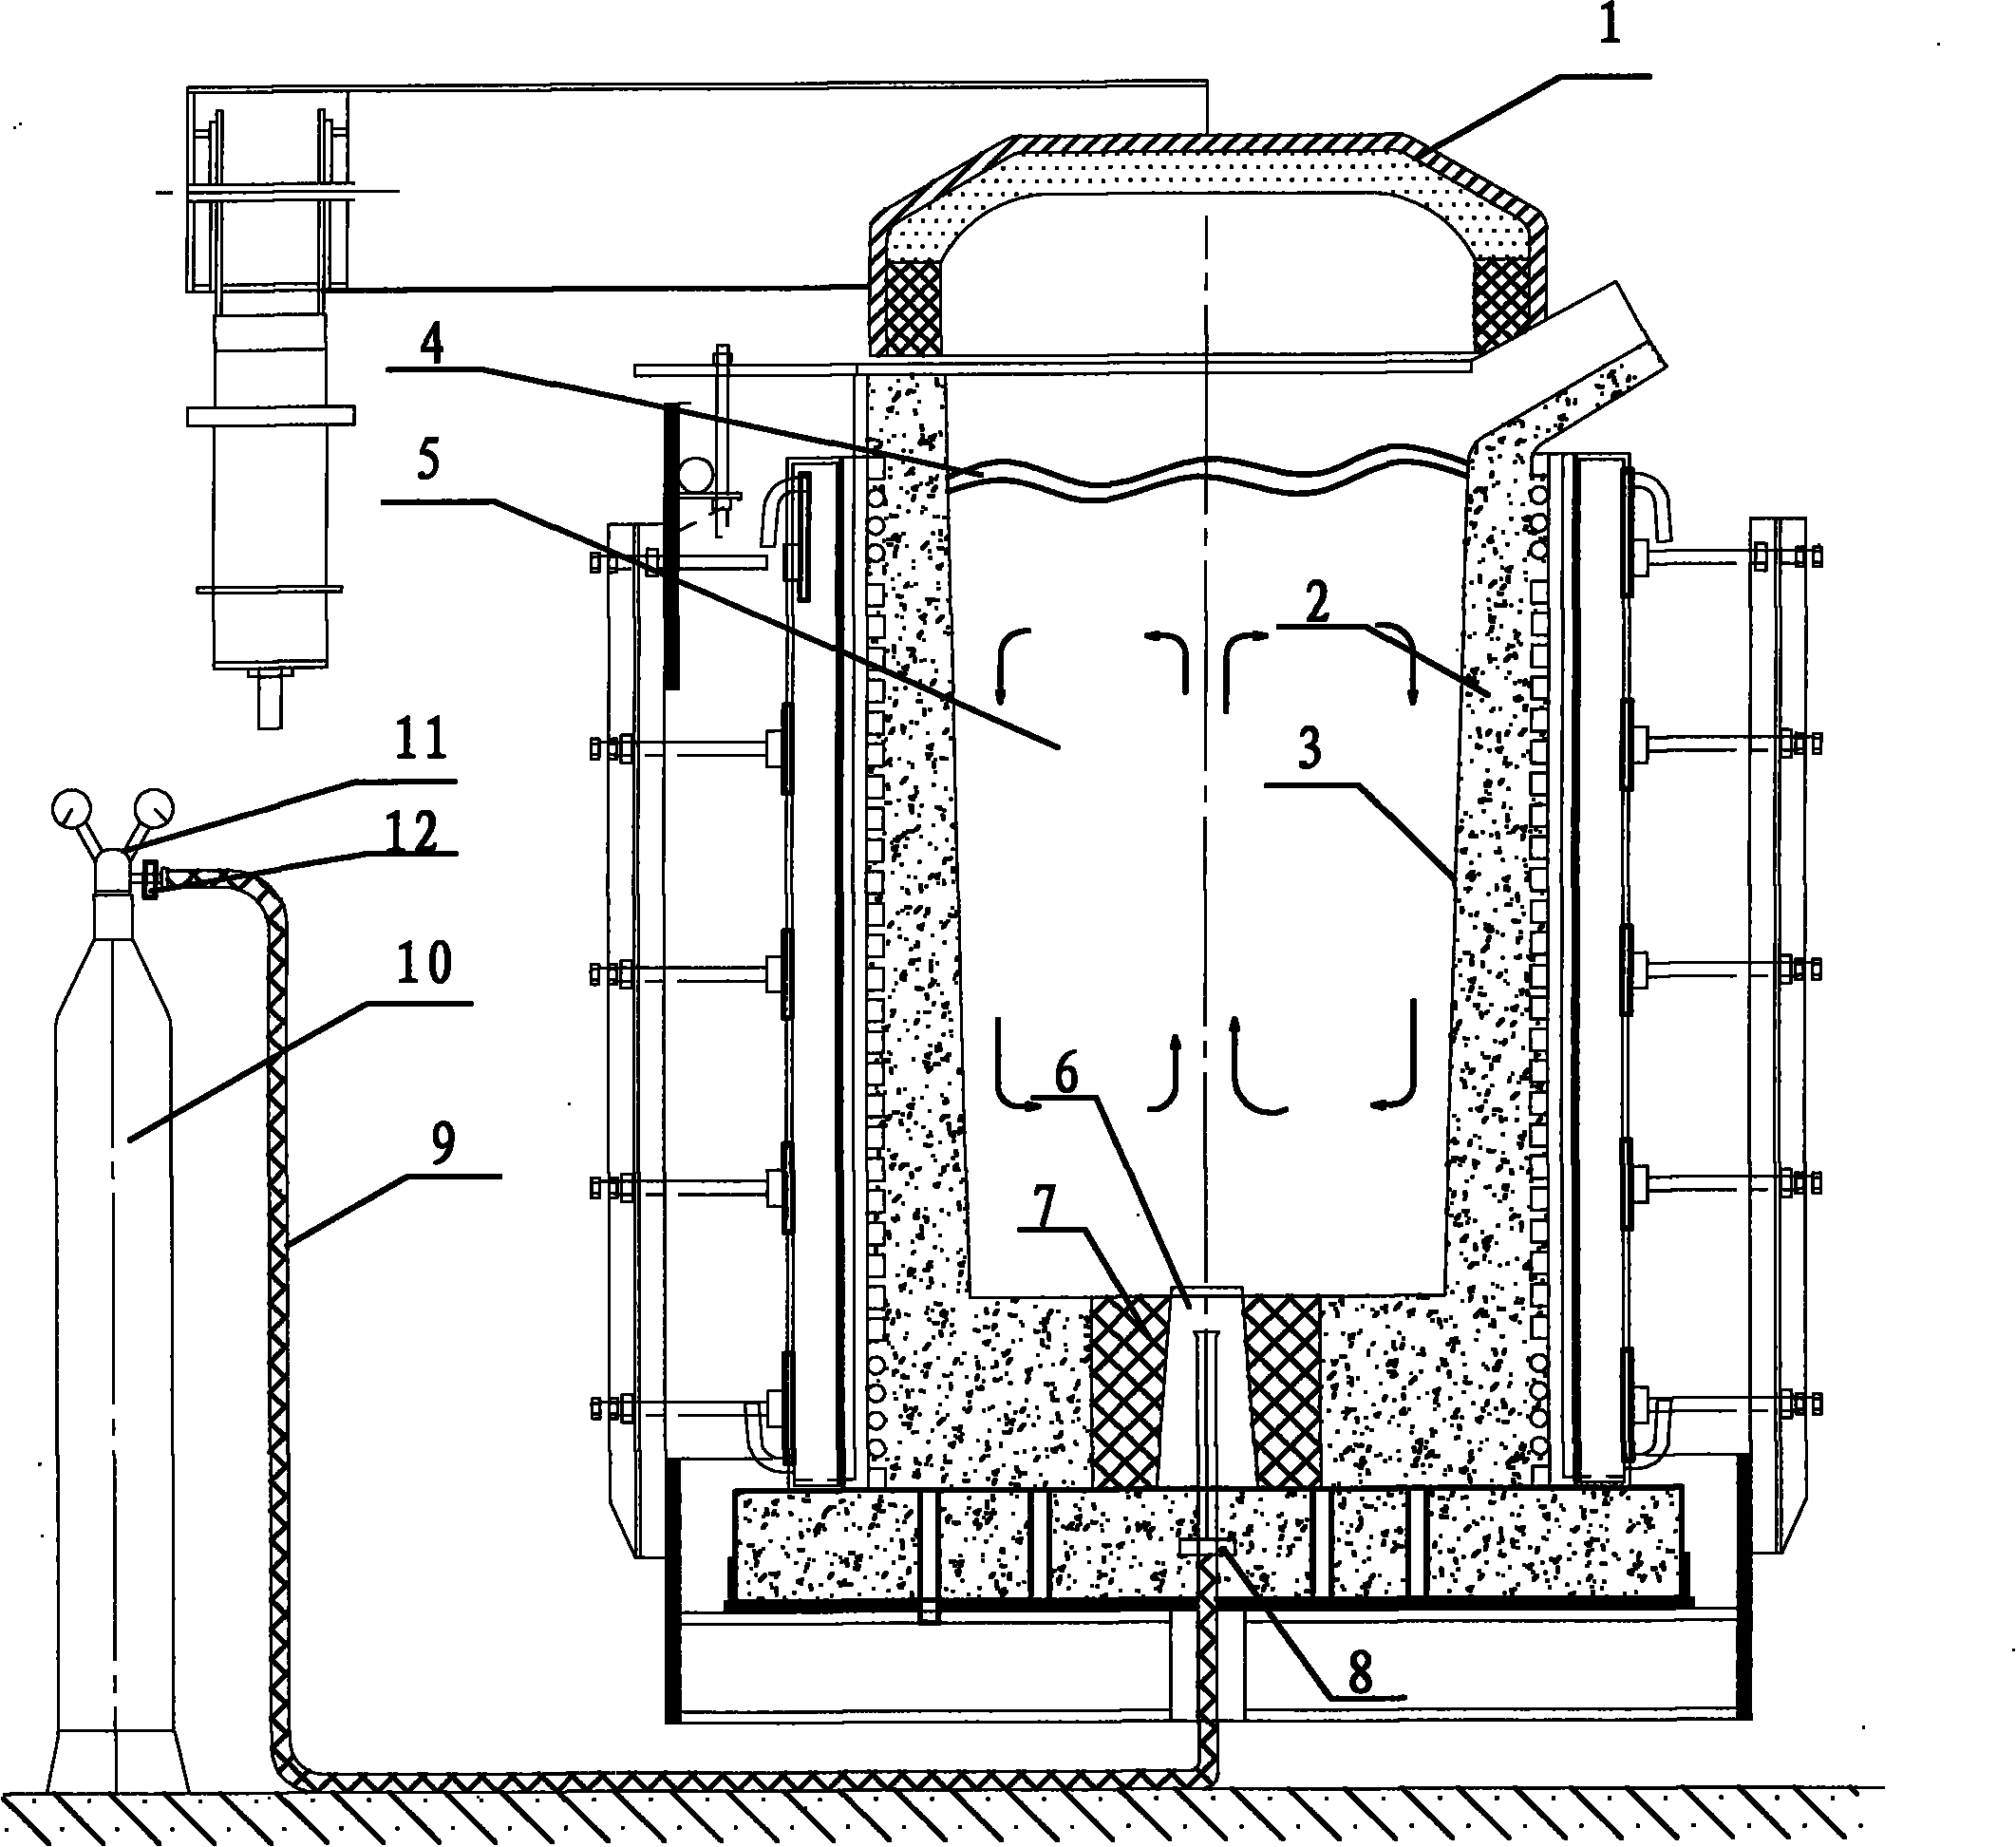 Process method for refining austenitic manganese steel by blowing argon gas into medium frequency induction furnace